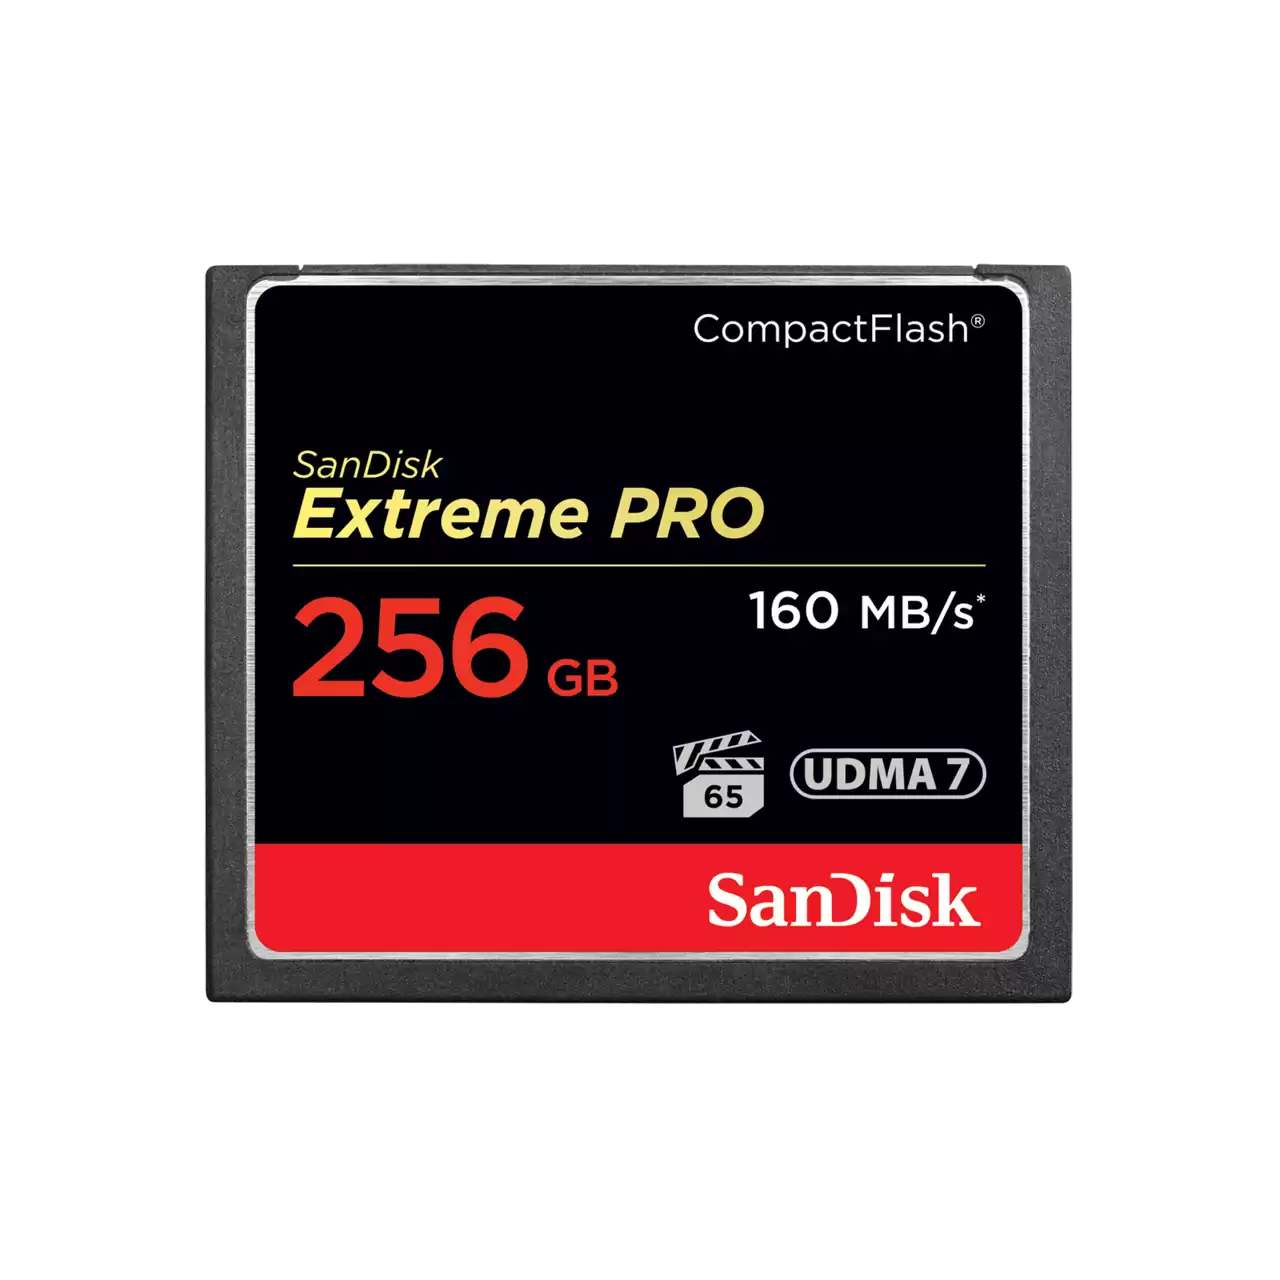 SanDisk 256GB Extreme PRO CompactFlash Memory Card